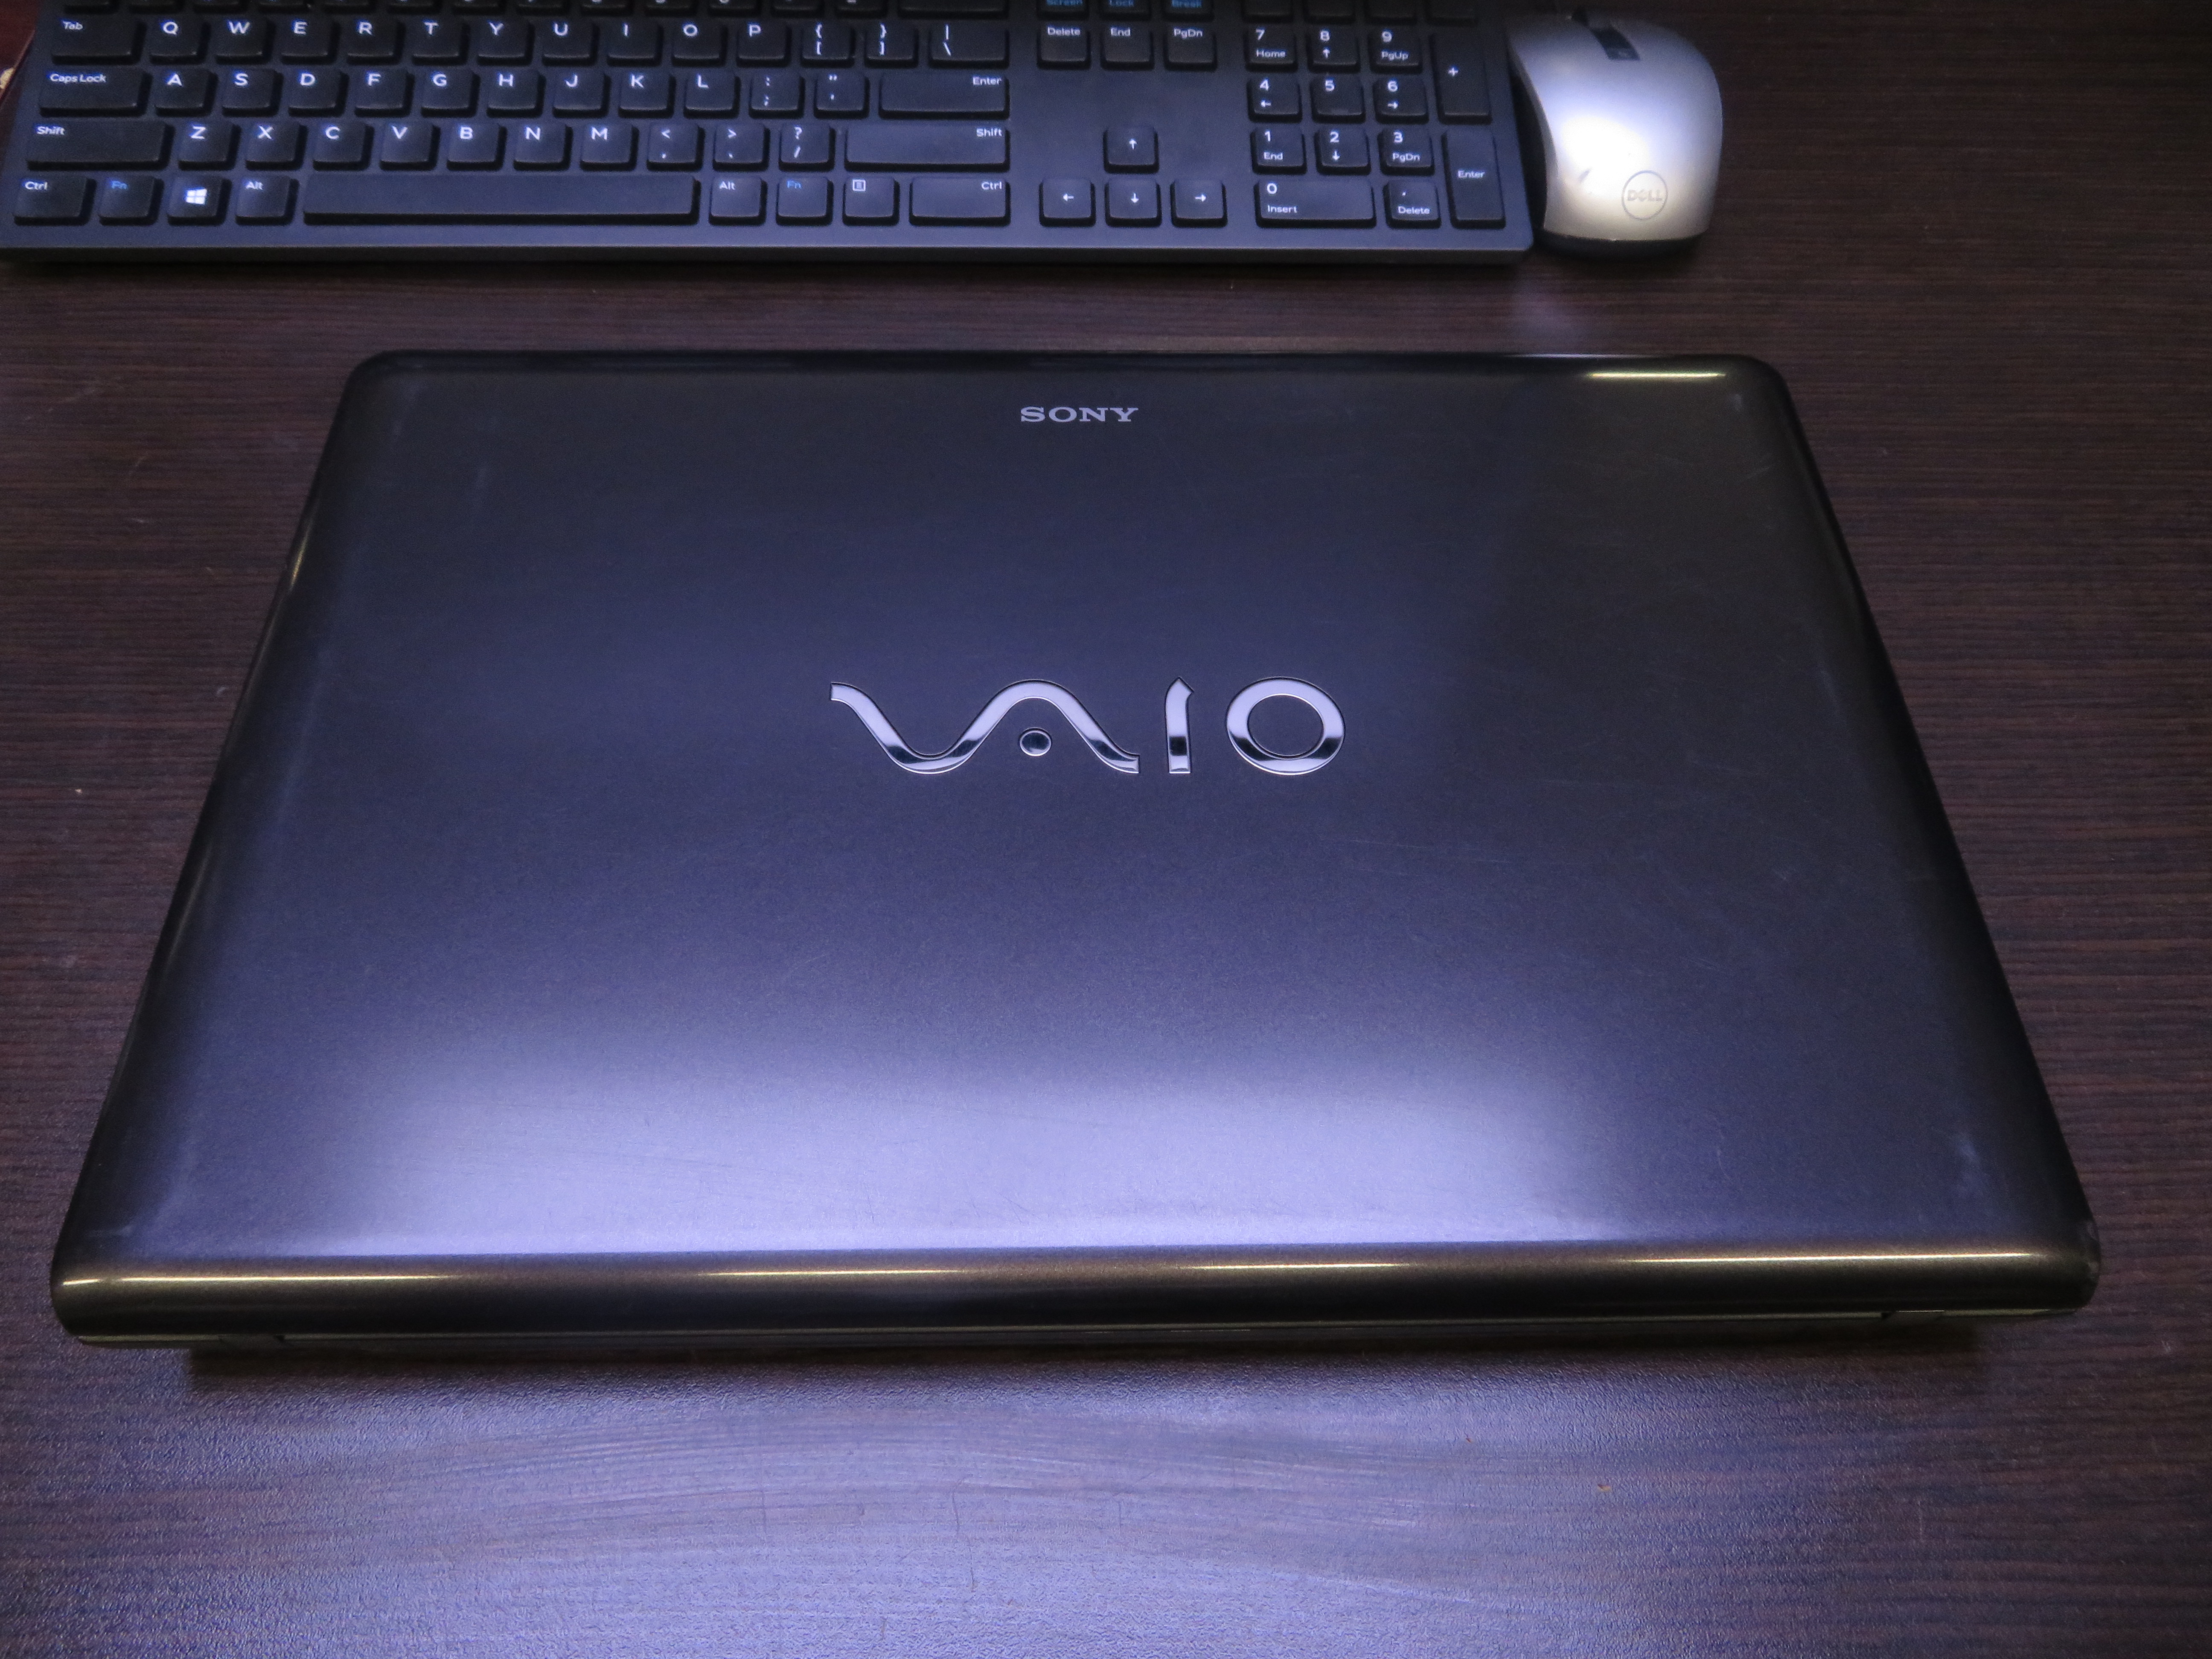 sony vaio recovery disk download windows 8